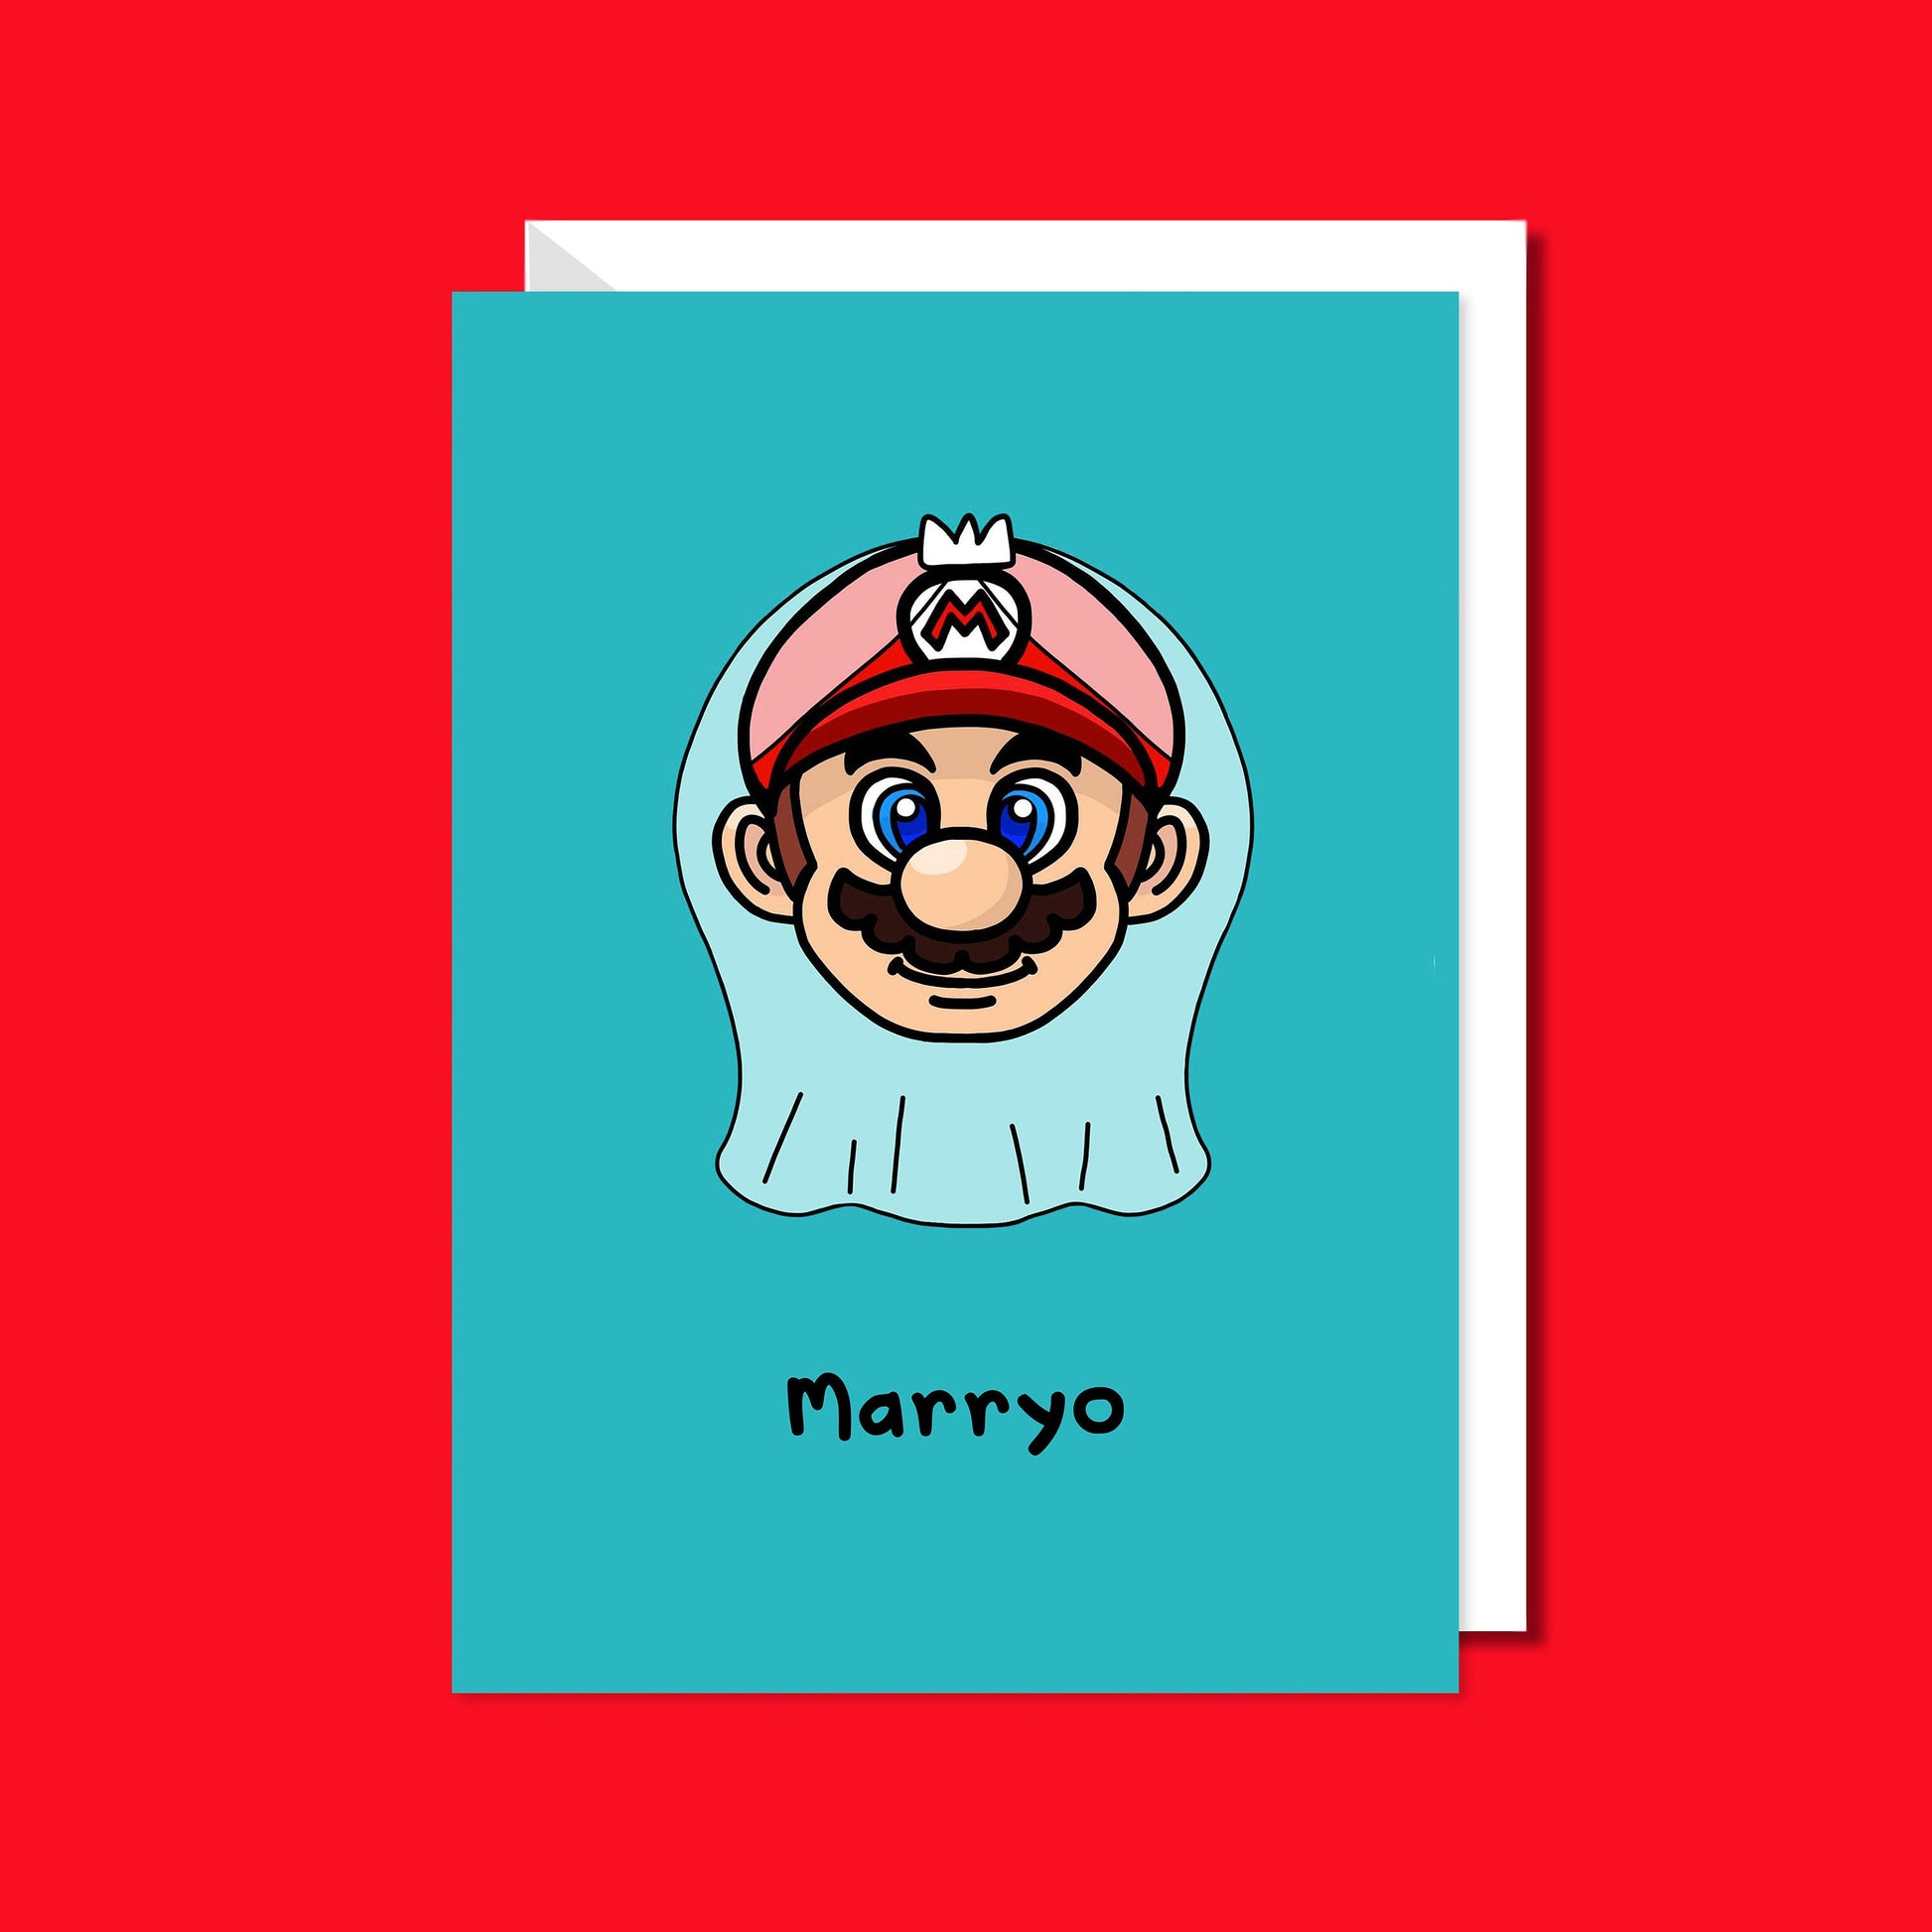 The Marryo - Mario Engagement Wedding Card on a red background with a white envelope underneath. The blue a6 congratulations card features a smiling nintendo mario character head wearing a white bridal wedding veil, underneath him is black text reading 'Marryo'.